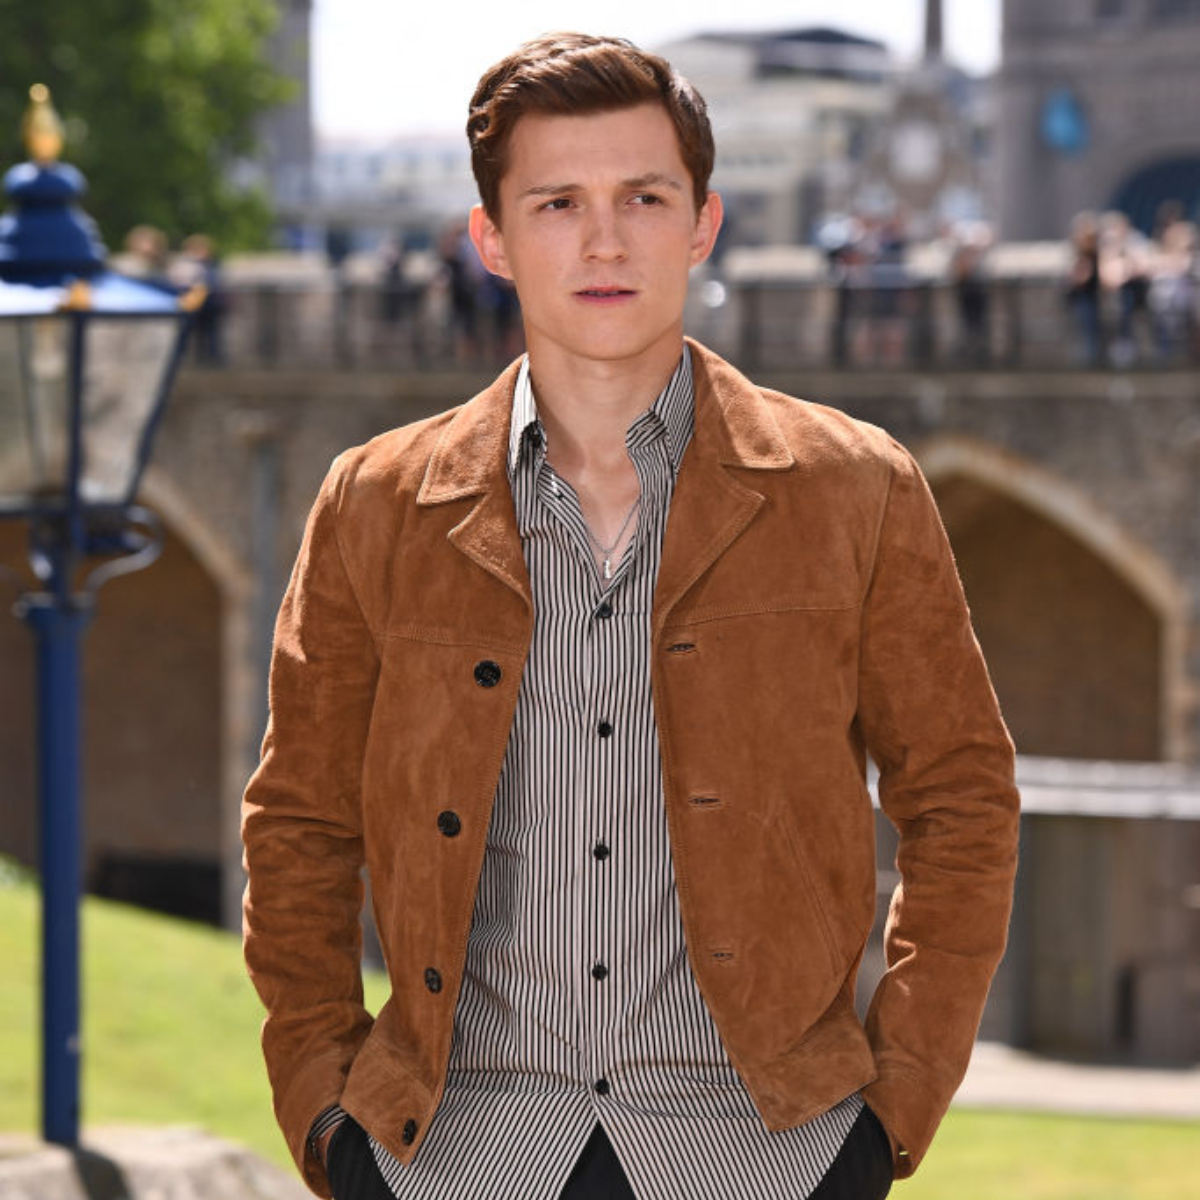 EXCLUSIVE: Spider Man: Far From Home star Tom Holland reveals what Peter Parker's immaturity is